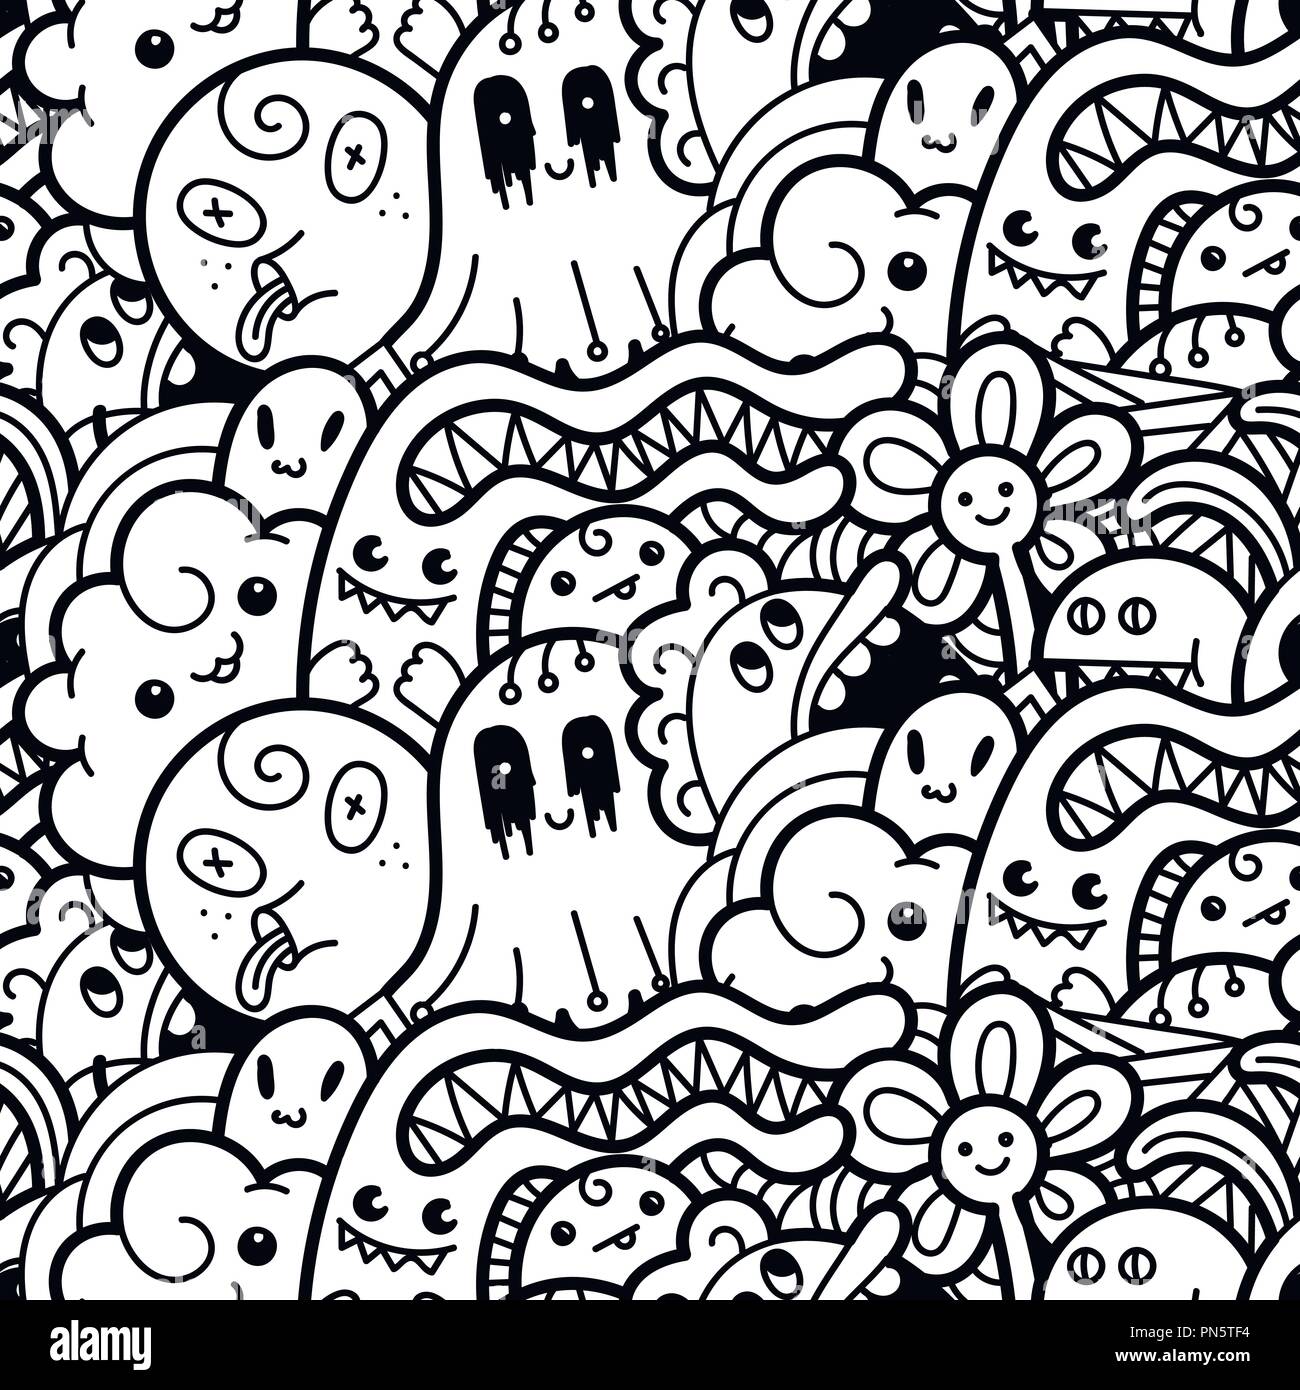 Funny doodle monsters seamless pattern for prints designs and children books vector illustration for coloring pages stock vector image art